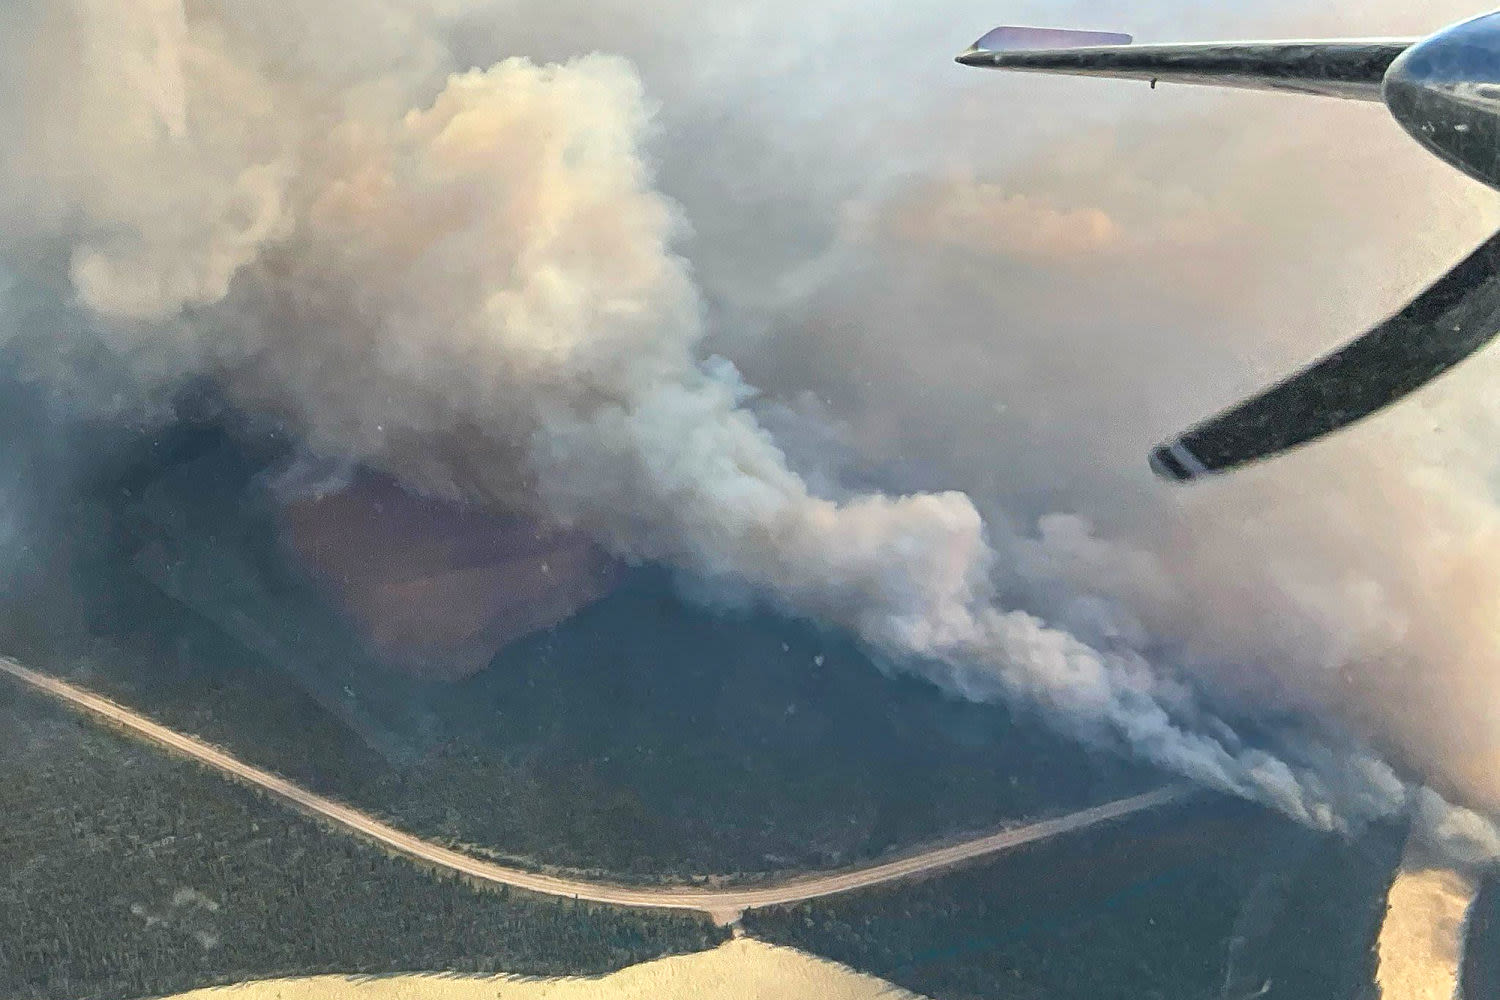 Wildfires across western U.S. and Canada force thousands to evacuate